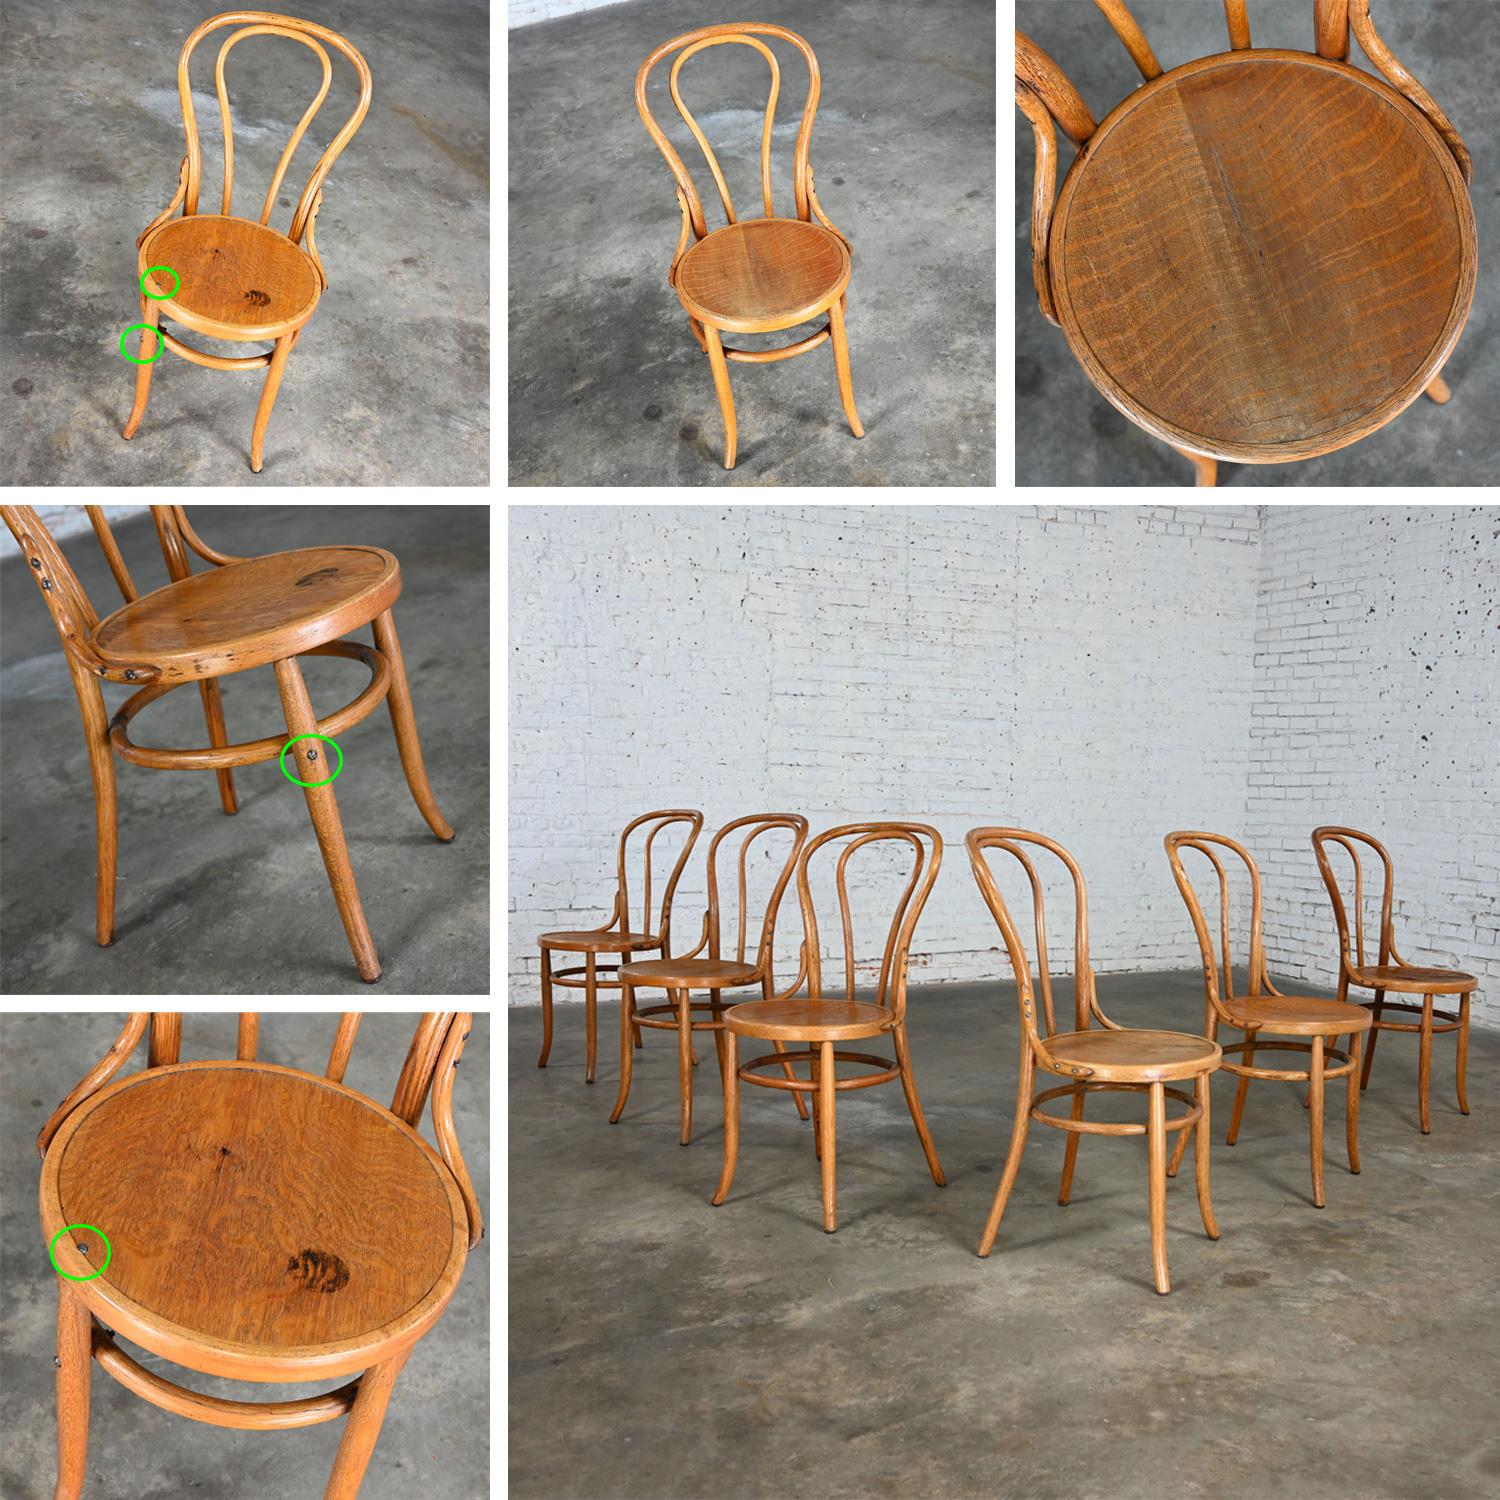 Bauhaus Oak Bentwood Chairs Attributed to Thonet #18 Café Chair Set of 6 For Sale 4